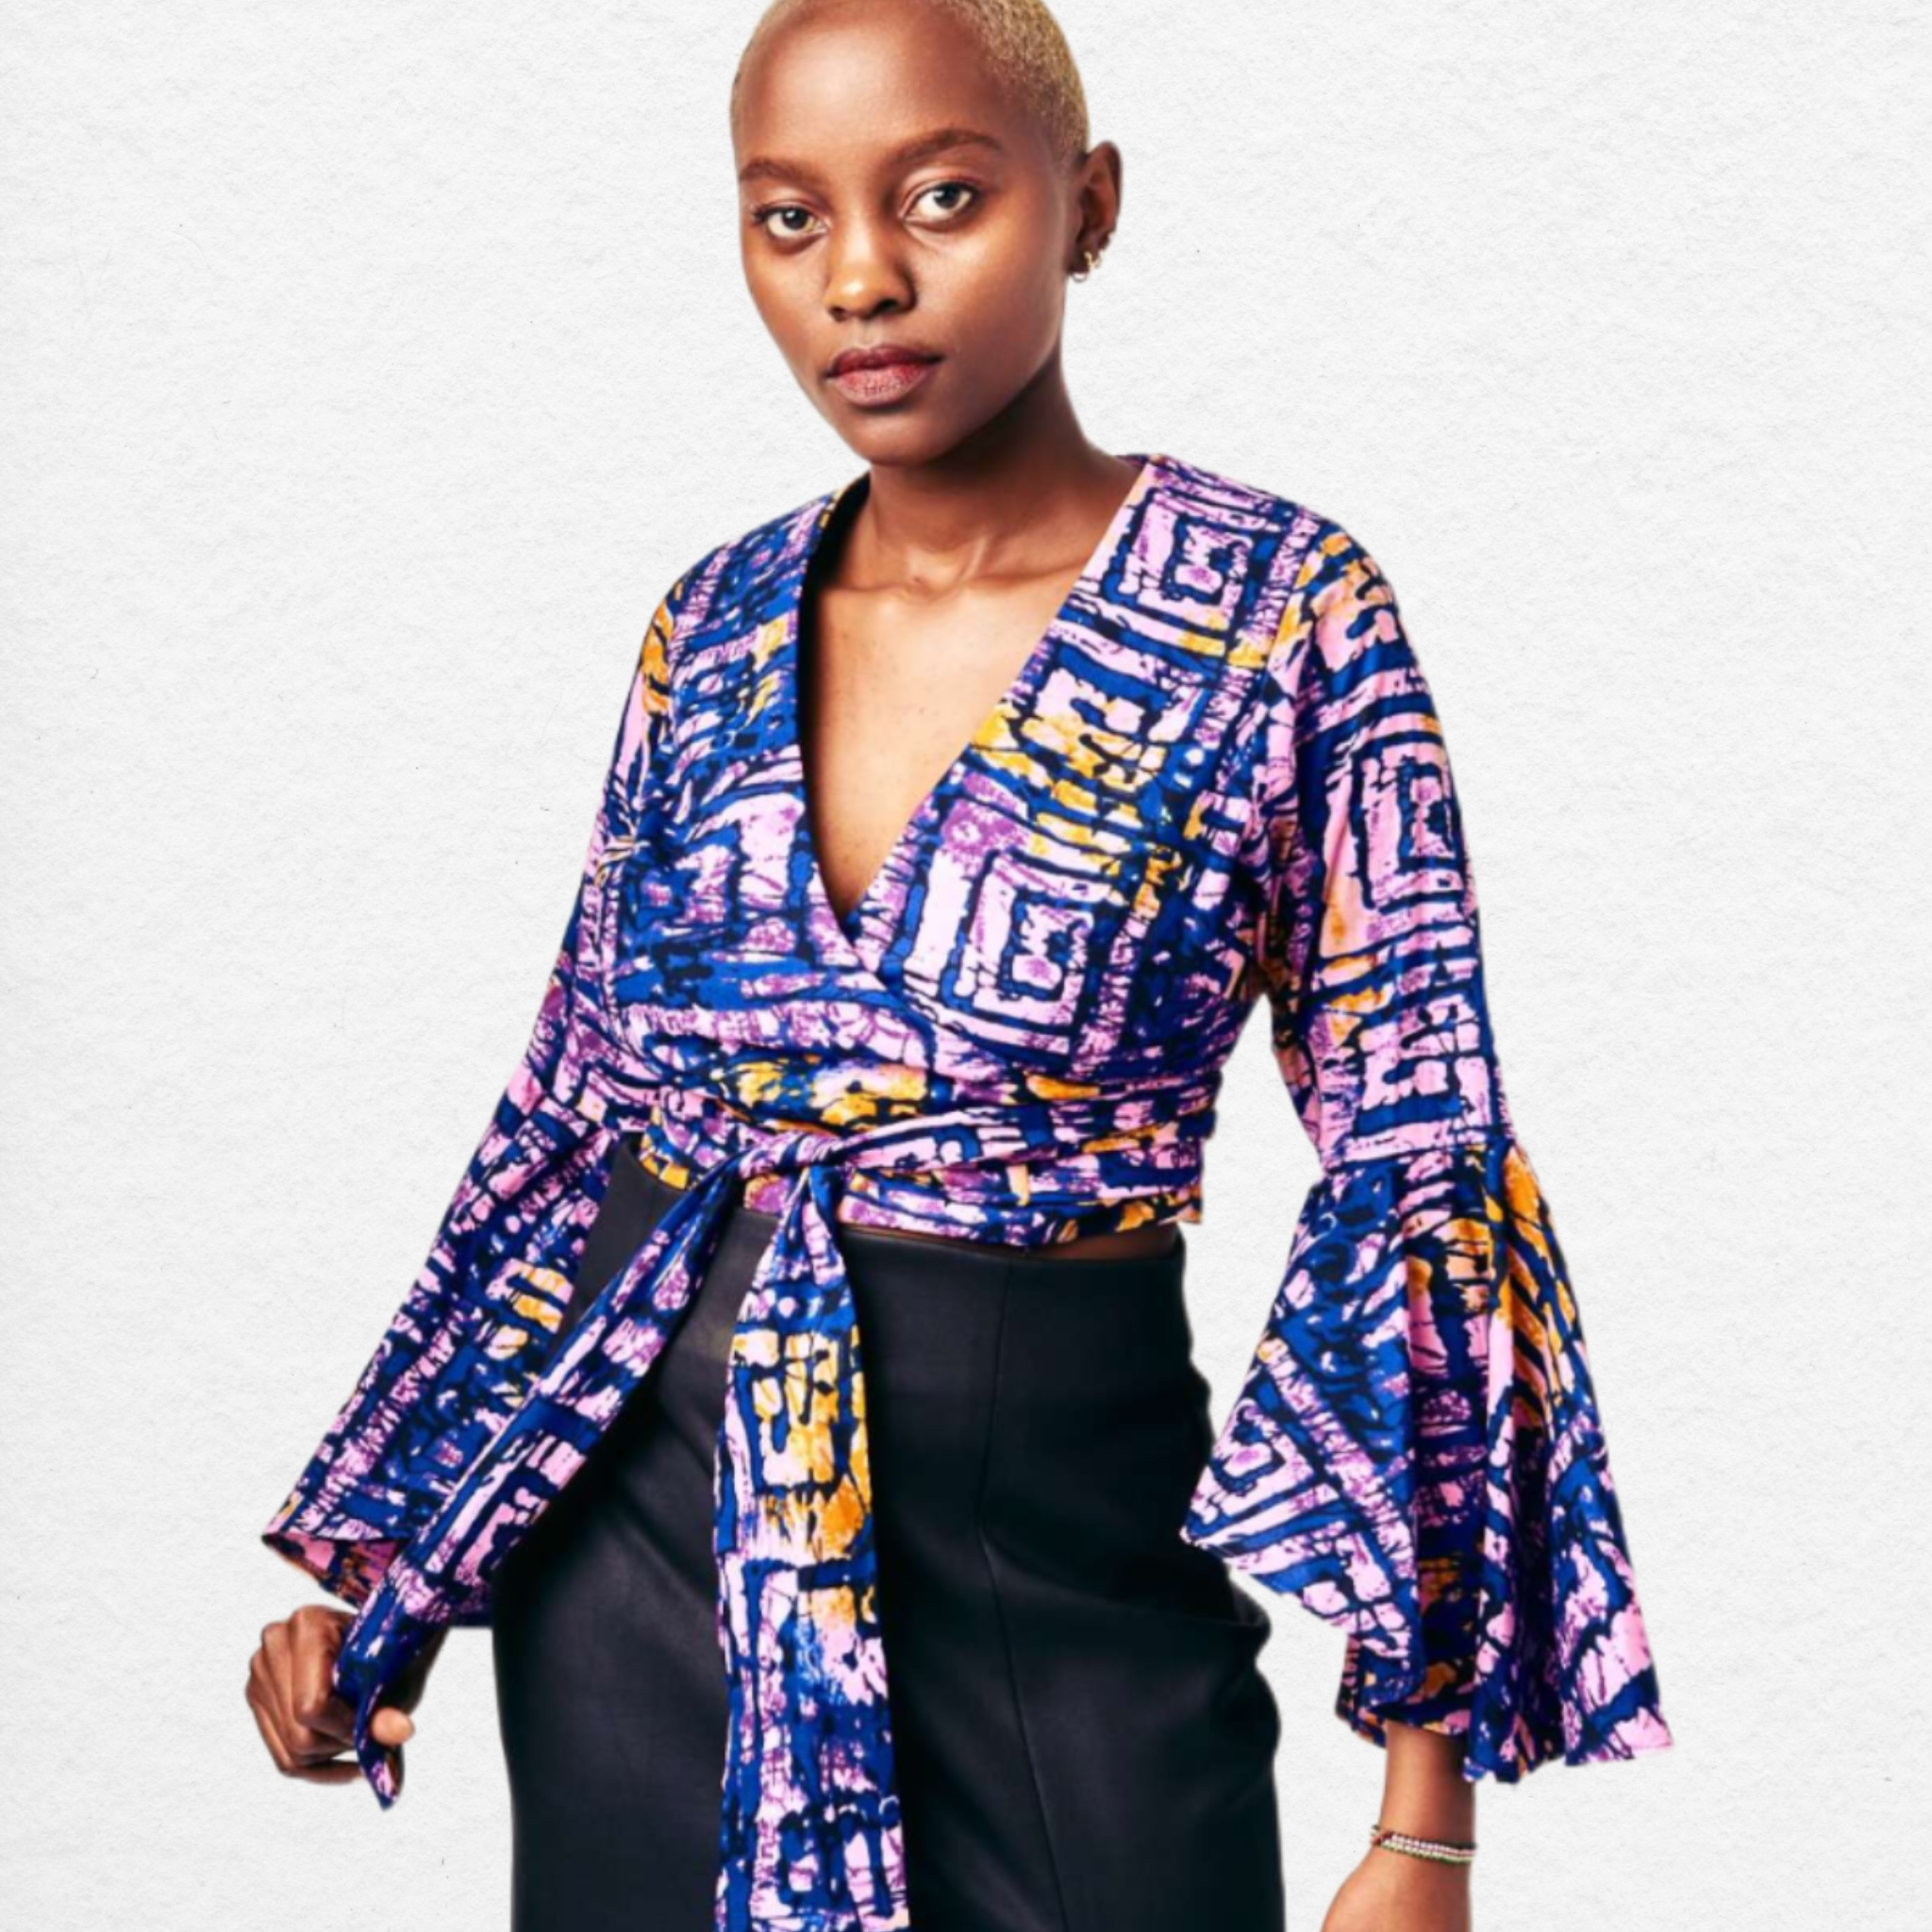 Shop the Tops Collection on Arrai. Discover stylish, affordable clothing, jewelry, handbags and unique handmade pieces from top Kenyan & African fashion brands prioritising sustainability and quality craftsmanship. Shop Fashion online on Arrai.shop.